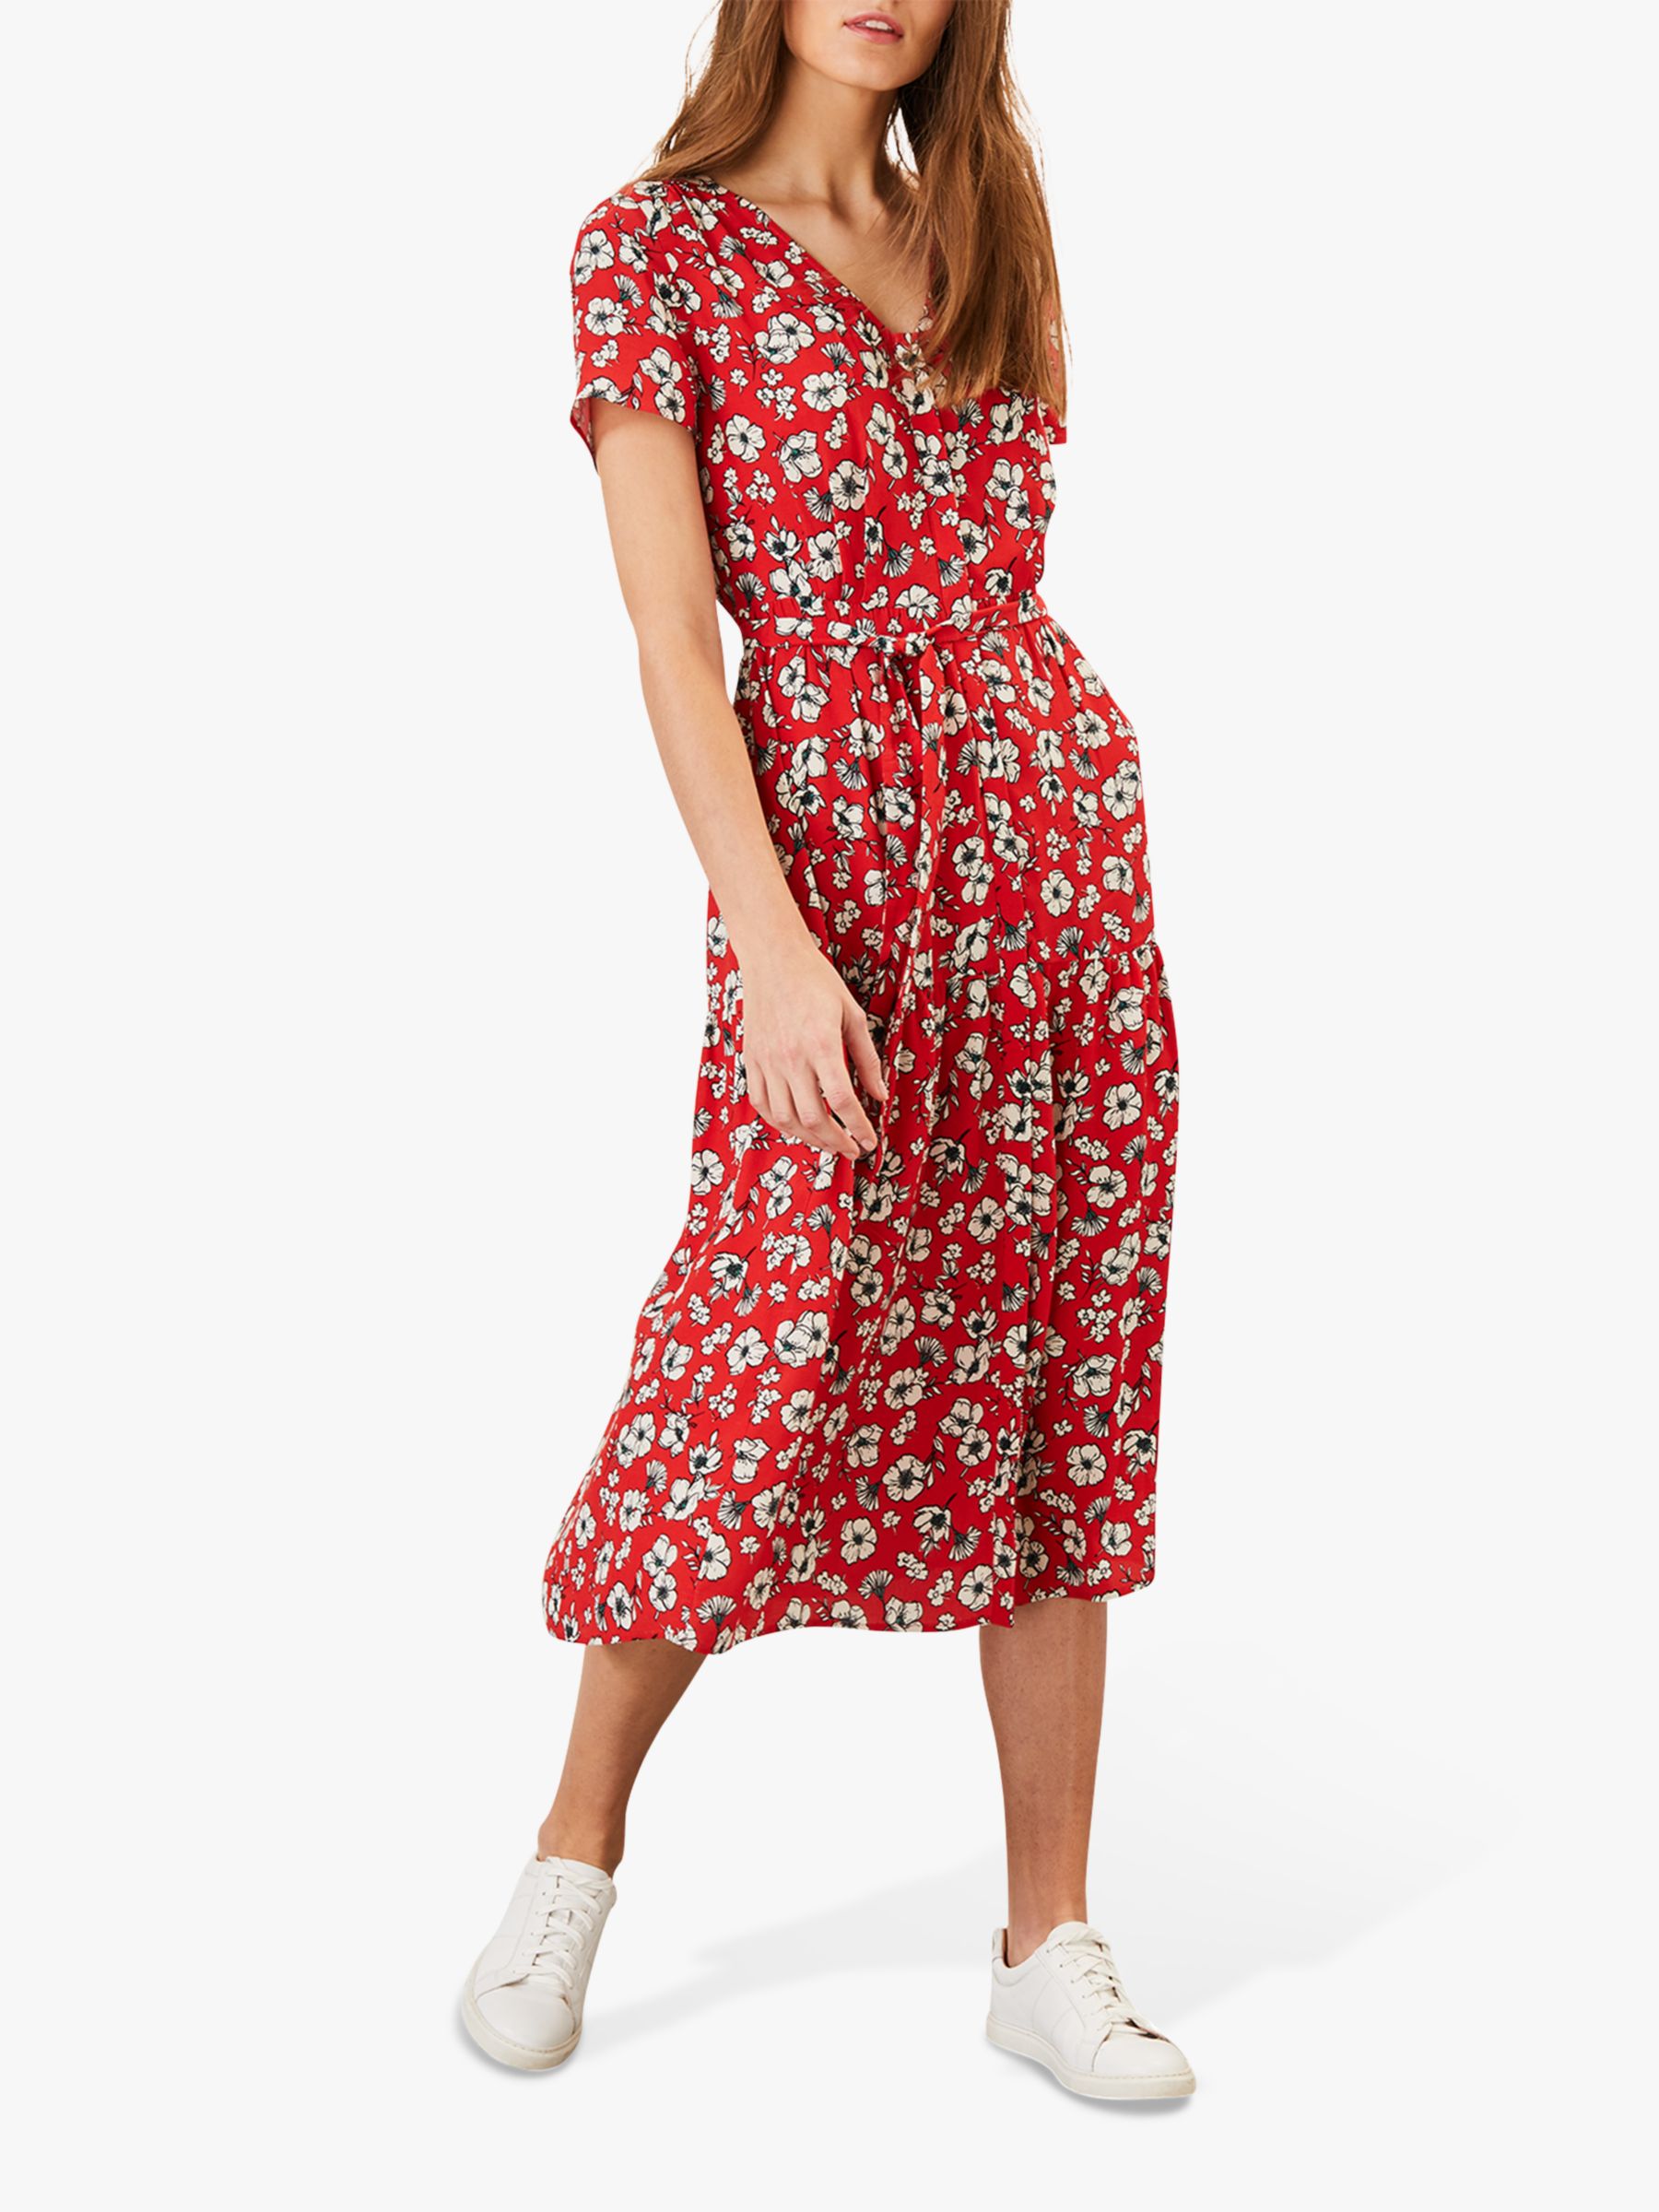 Phase Eight Daisy Ditsy Dress, Red/Multi